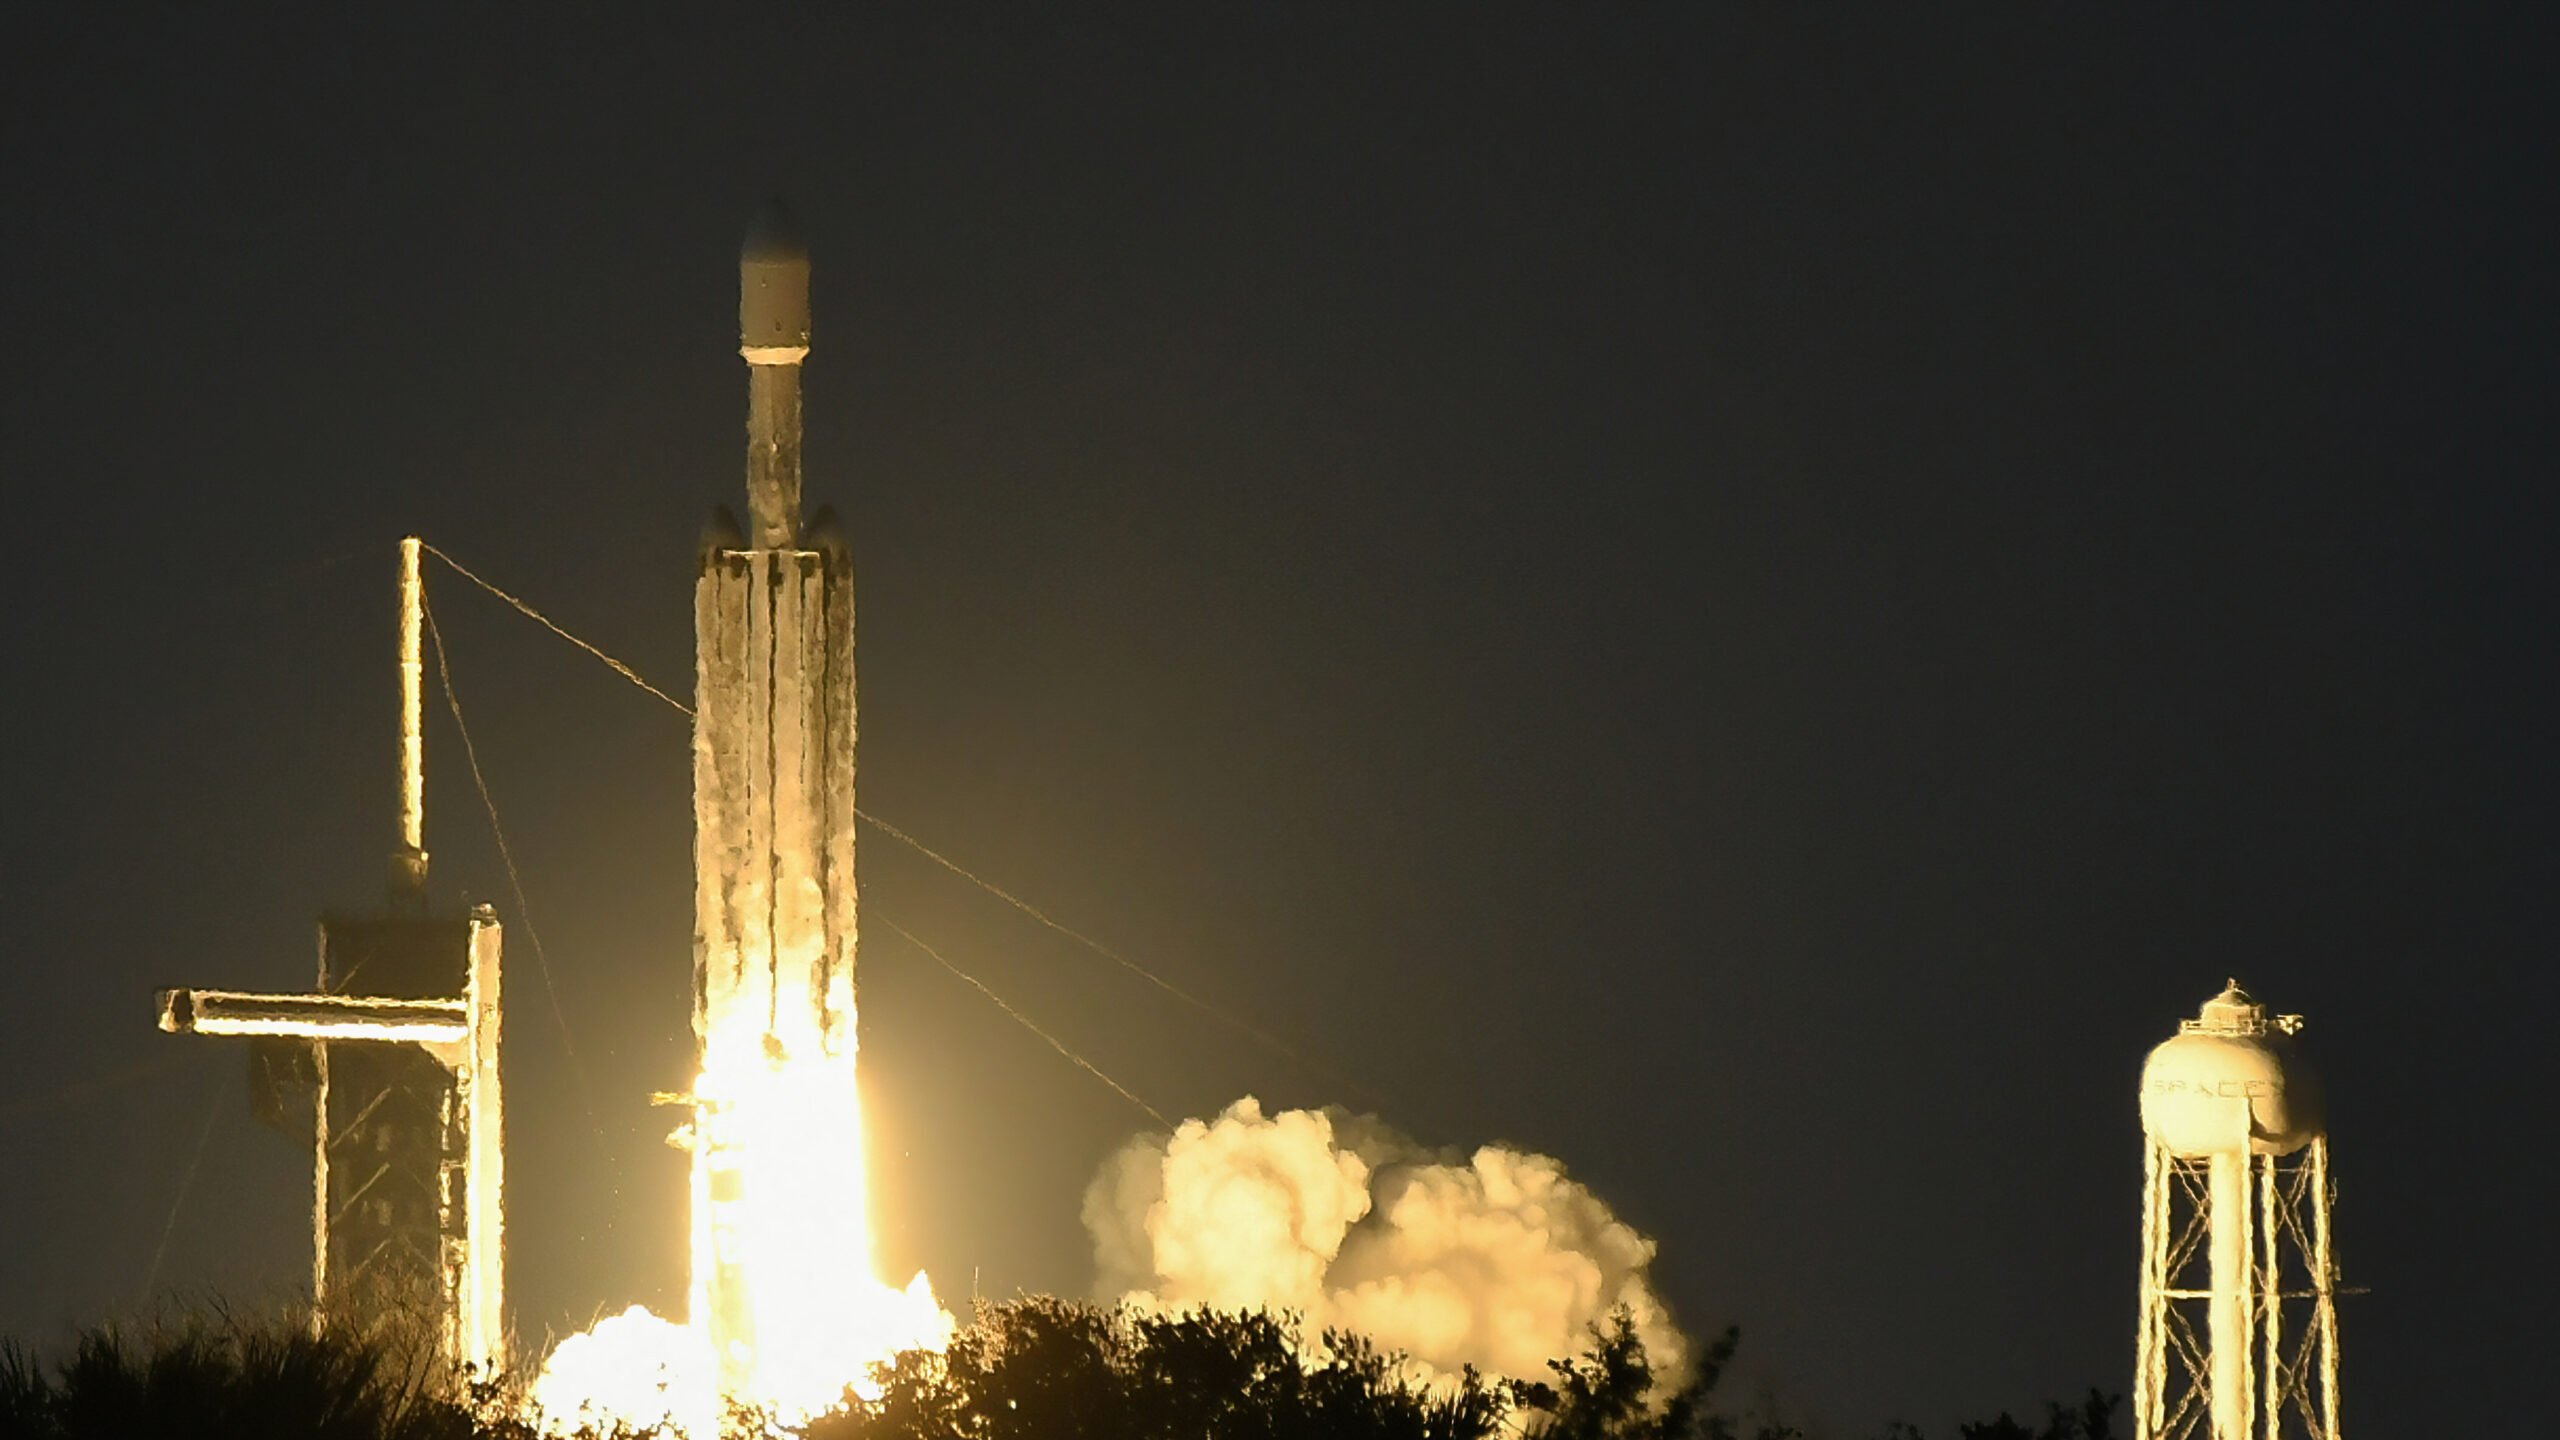 A SpaceX Falcon Heavy rocket launches from pad 39A at the